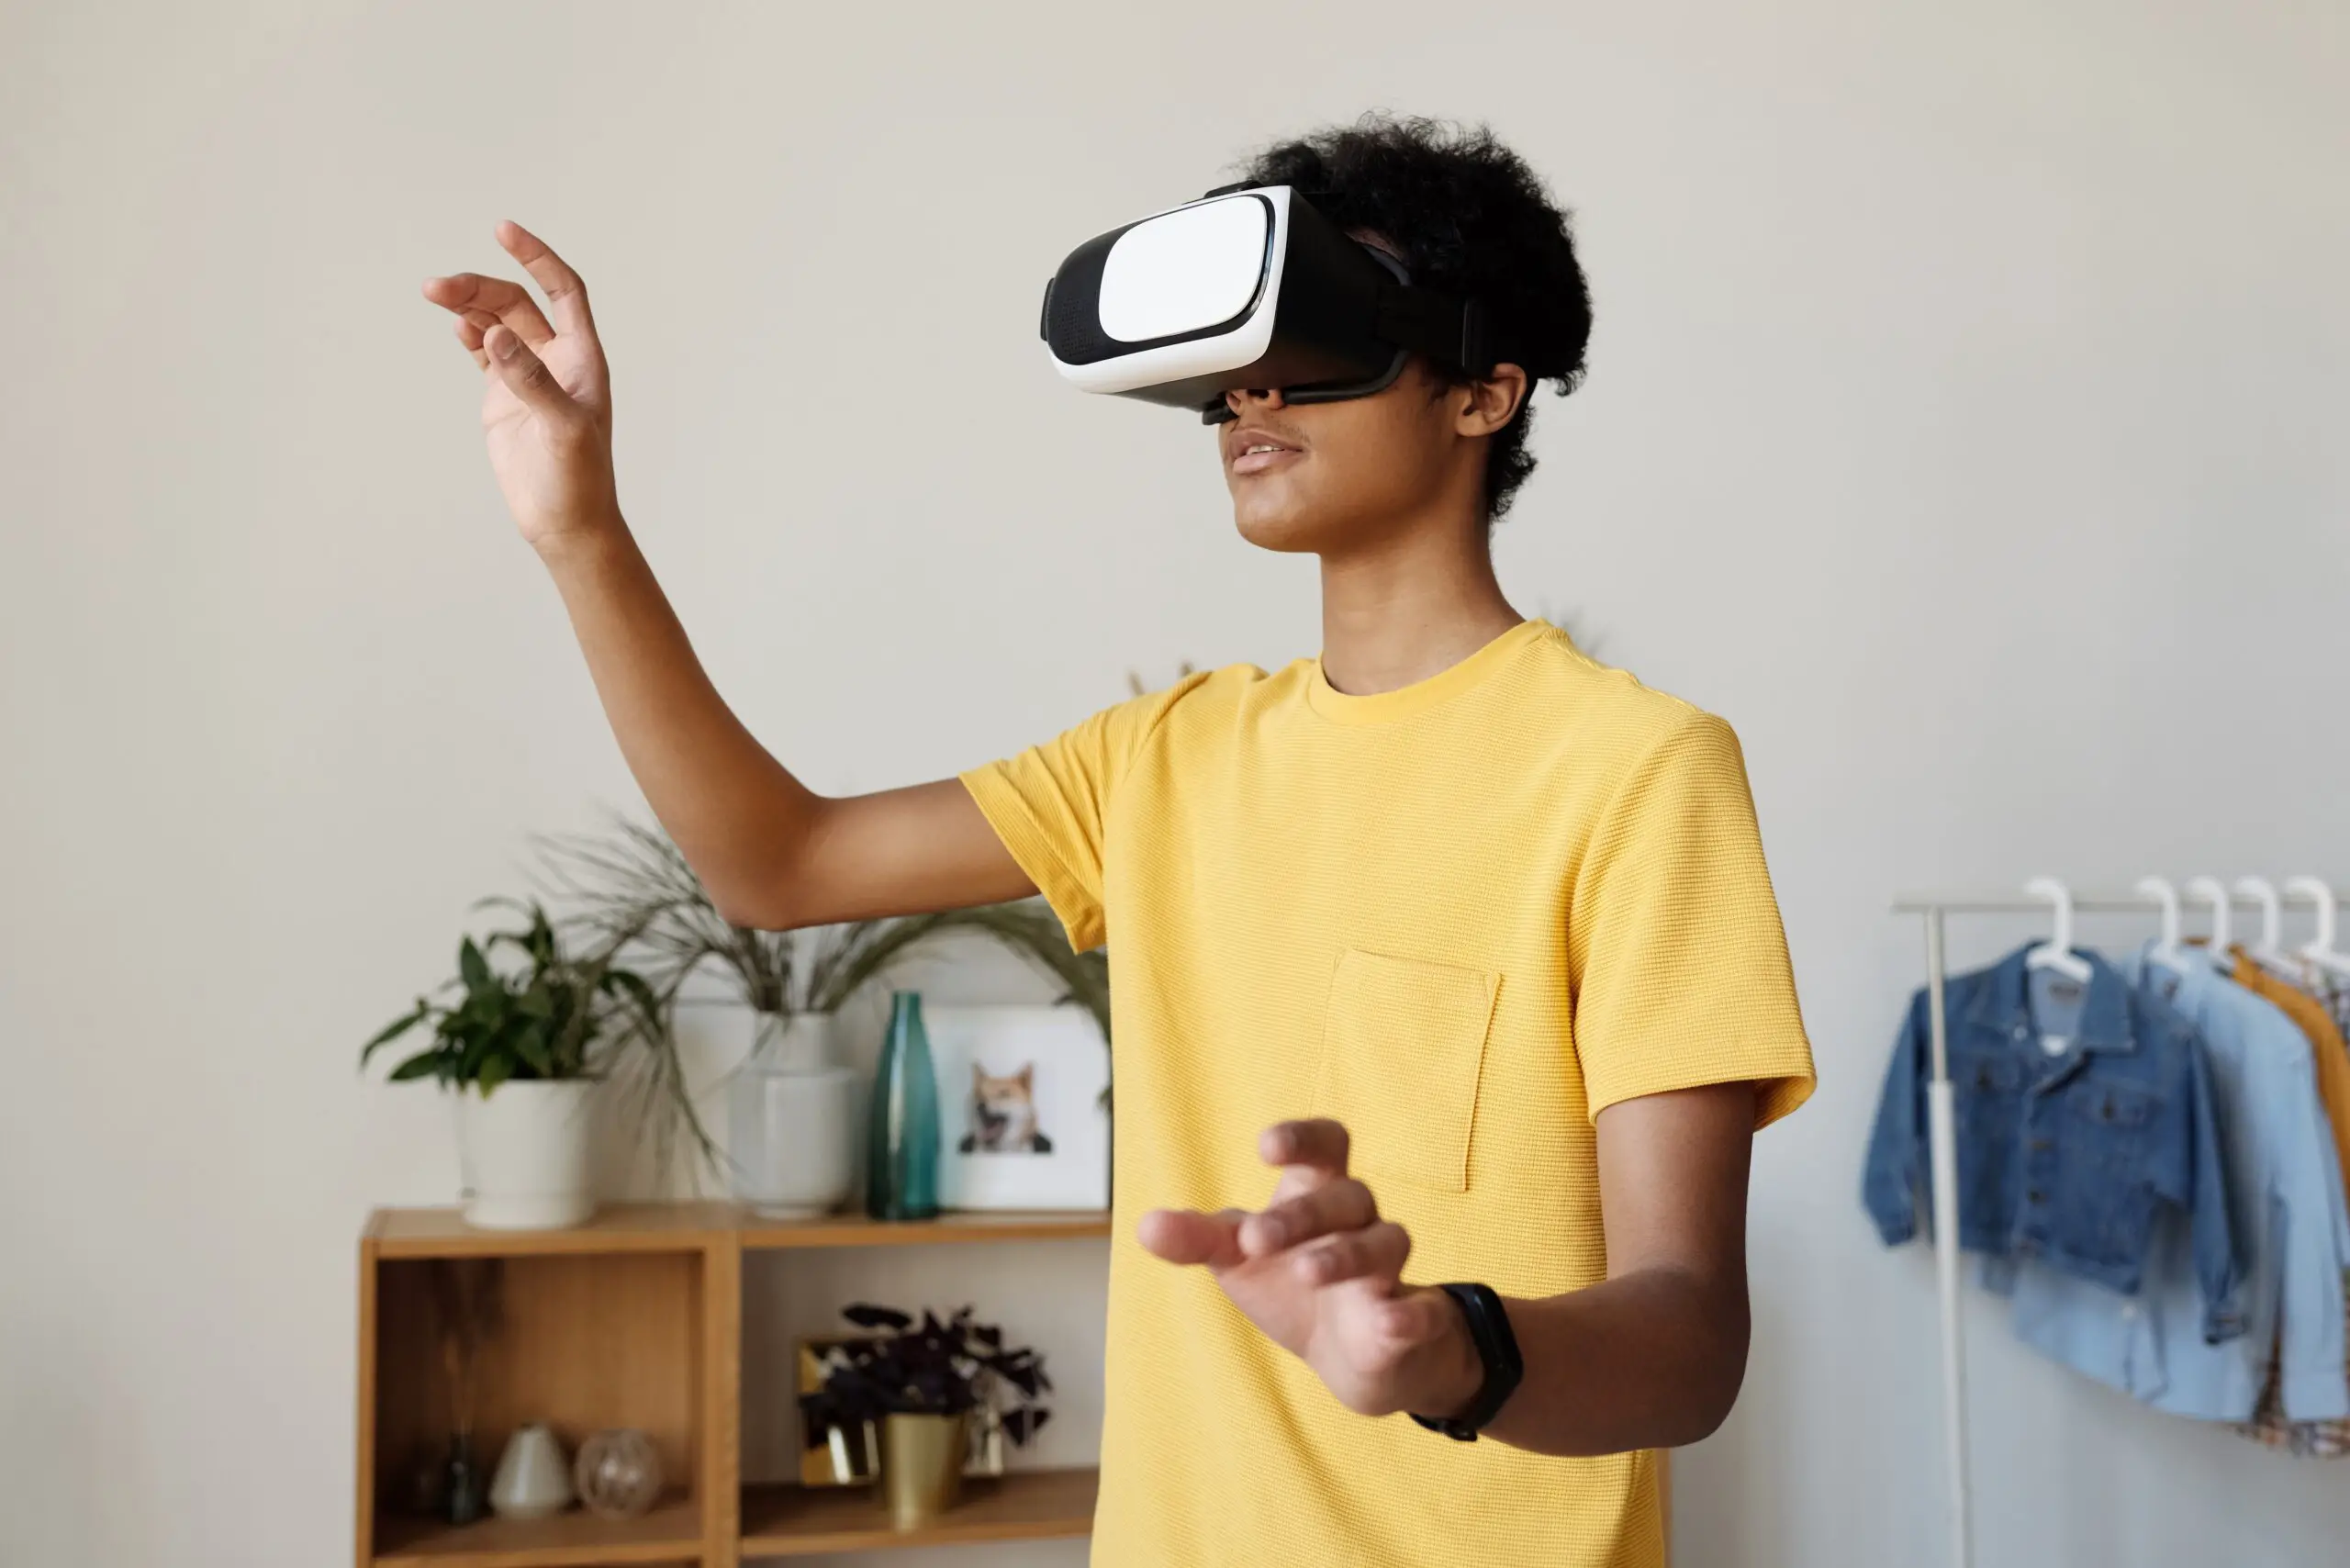 Prisms VR Raises $12.5M to Enhance Math Learning with Virtual Reality